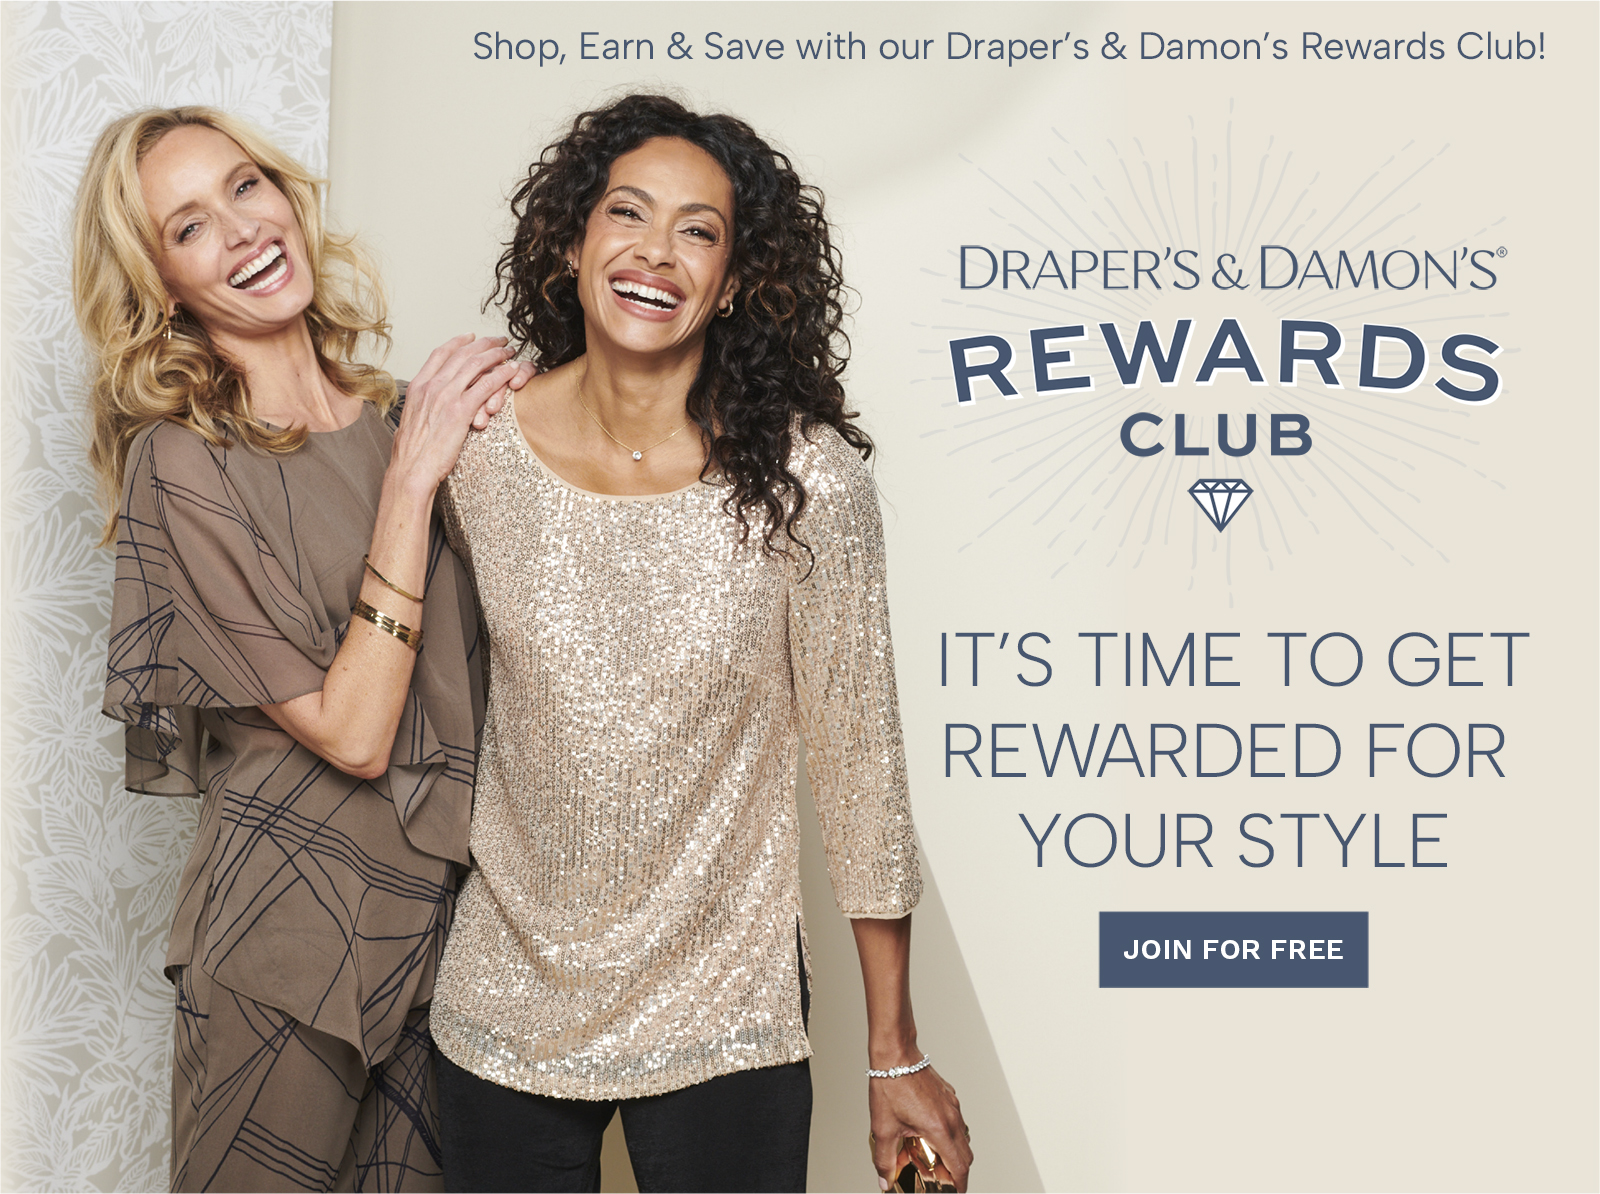 Shop, Earn & Save with our Draper's Rewards Club! Draper's & Damon's Rewards Club - It's time to get rewarded for your style. Join for Free!